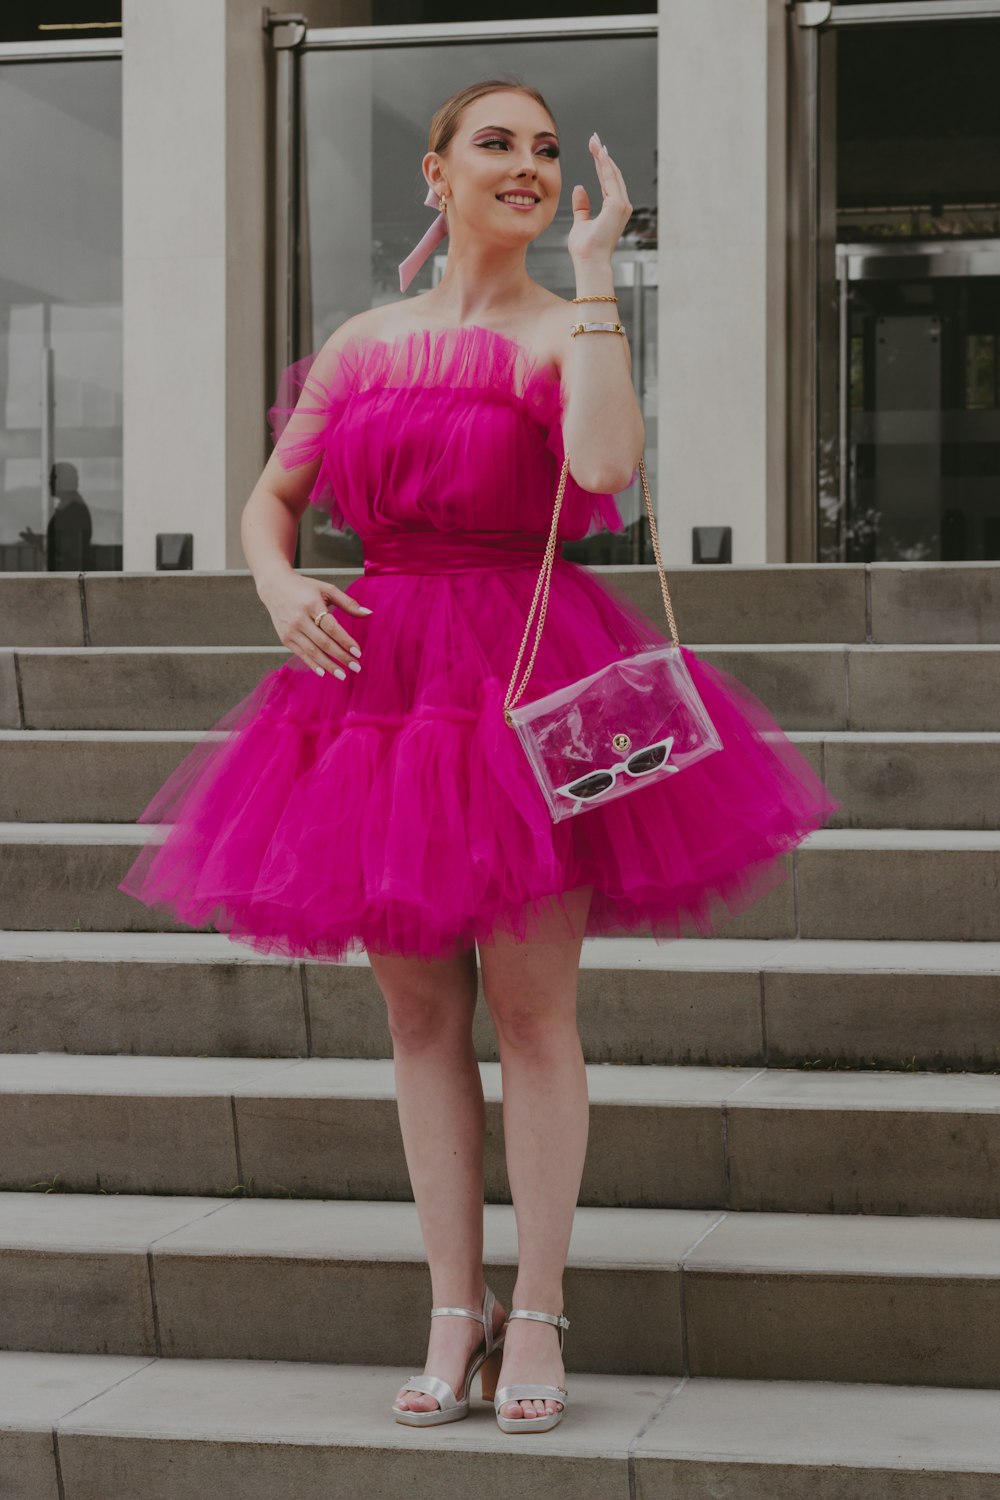 a woman in a pink dress is standing on some steps